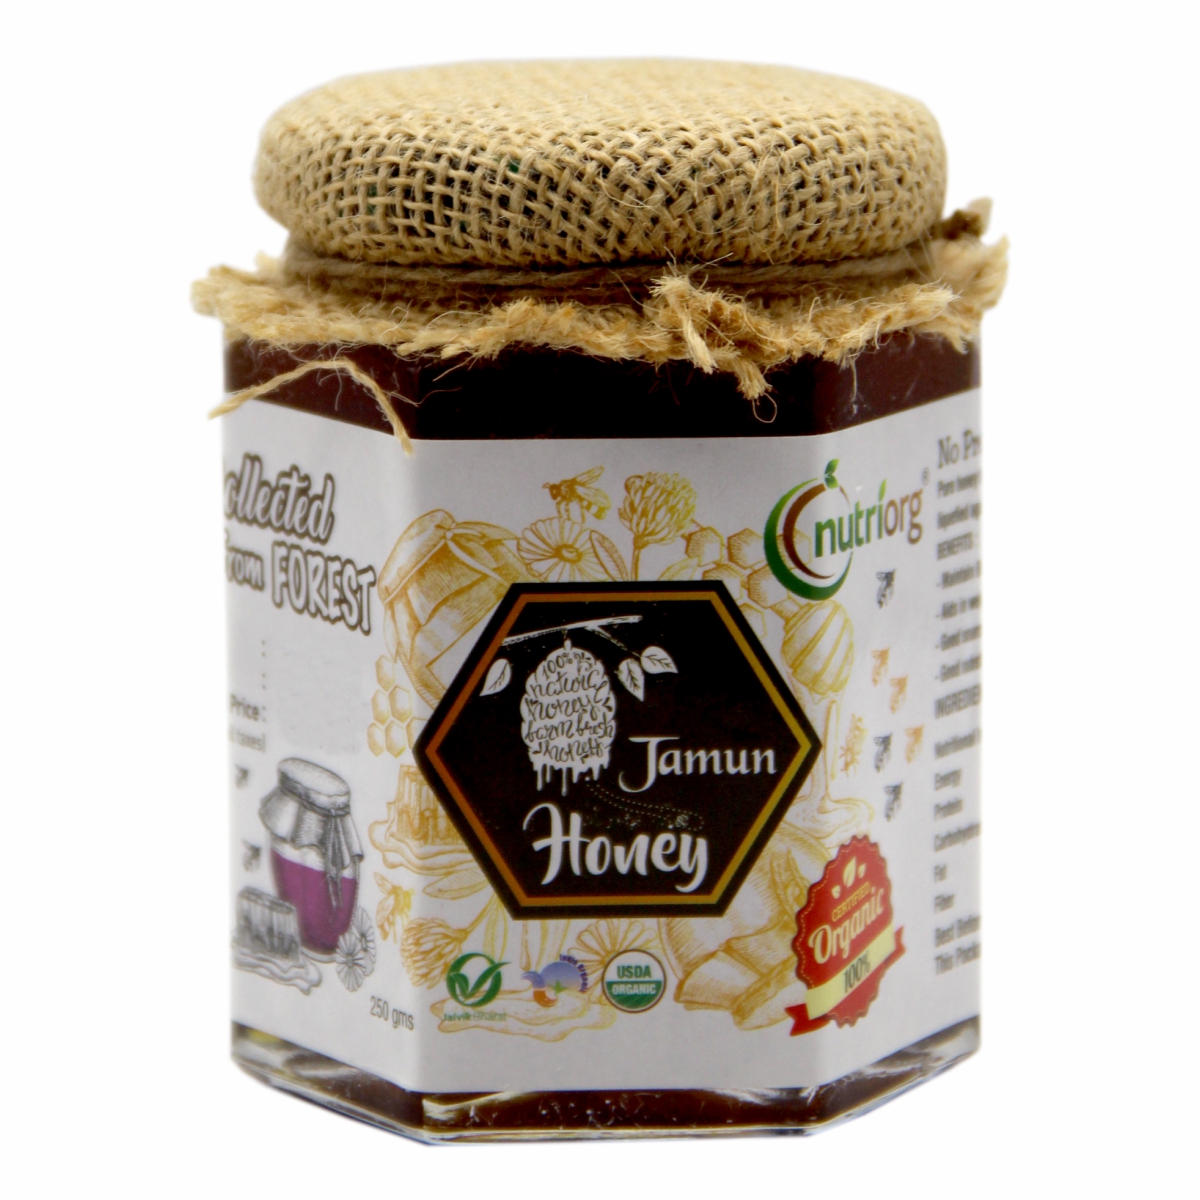 Picture of Nutriorg Certified Organic Honey with Jamun Flavor 250g